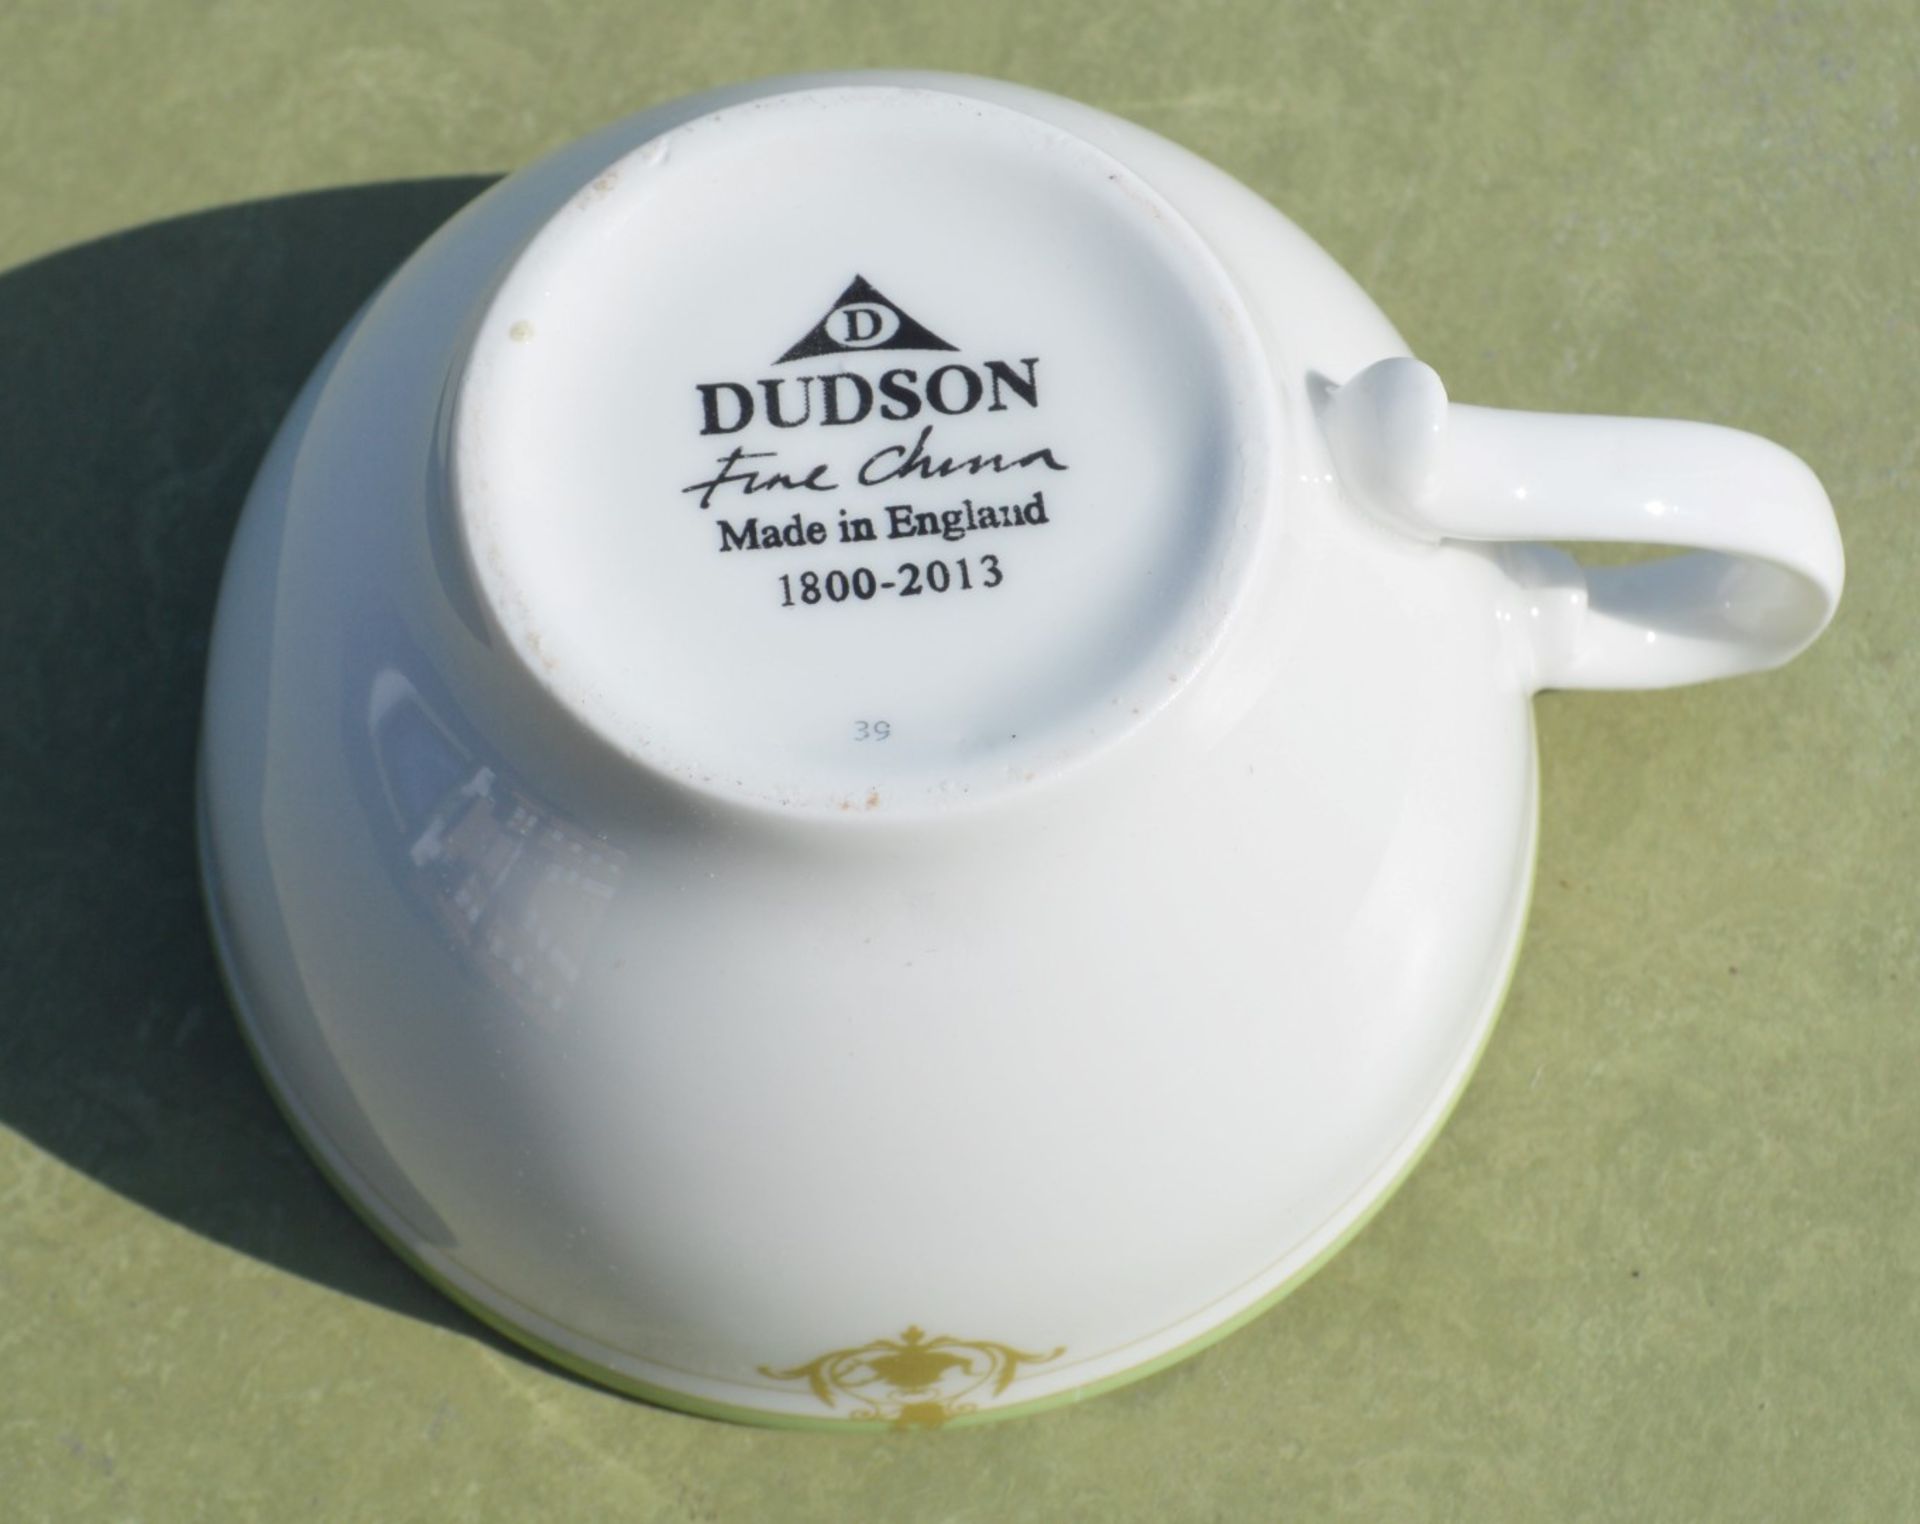 36 x DUDSON Fine China 'Georgian' Low Tea Cups With With Saucers All Featuring 'Famous Branding' - - Image 7 of 8